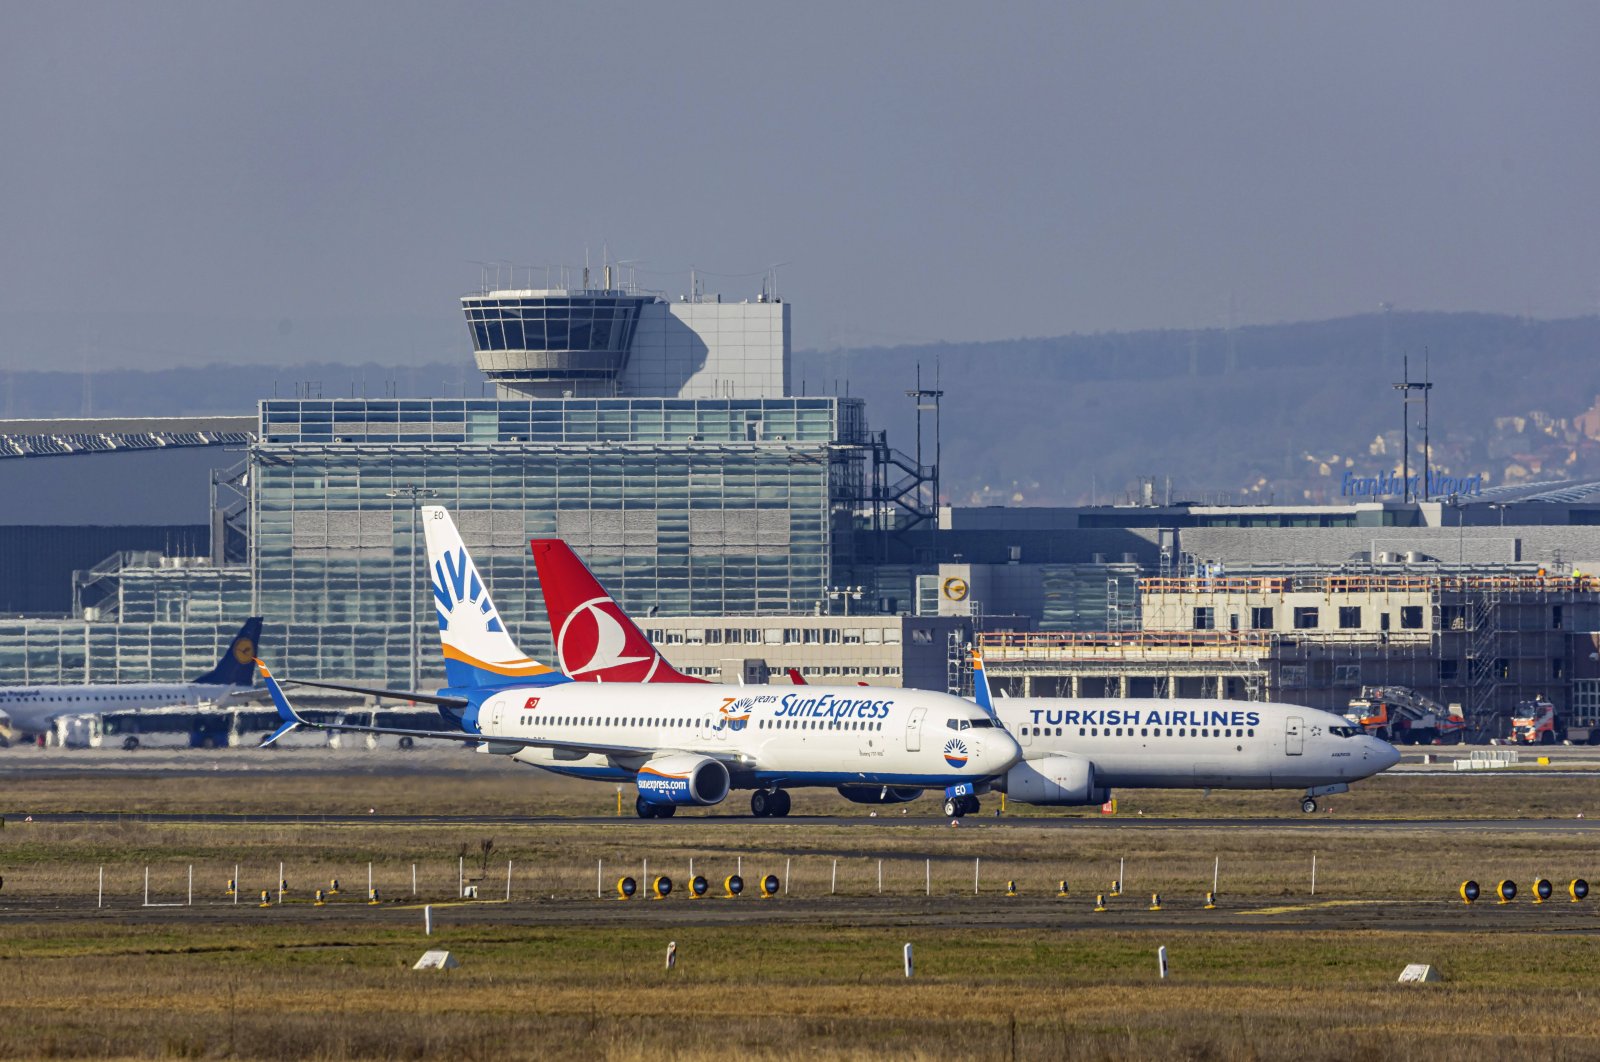 A SunExpress aircraft is seen beside a Turkish Airlines plane at Frankfurt Airport, Germany, Feb. 7, 2020. (Reuters Photo)